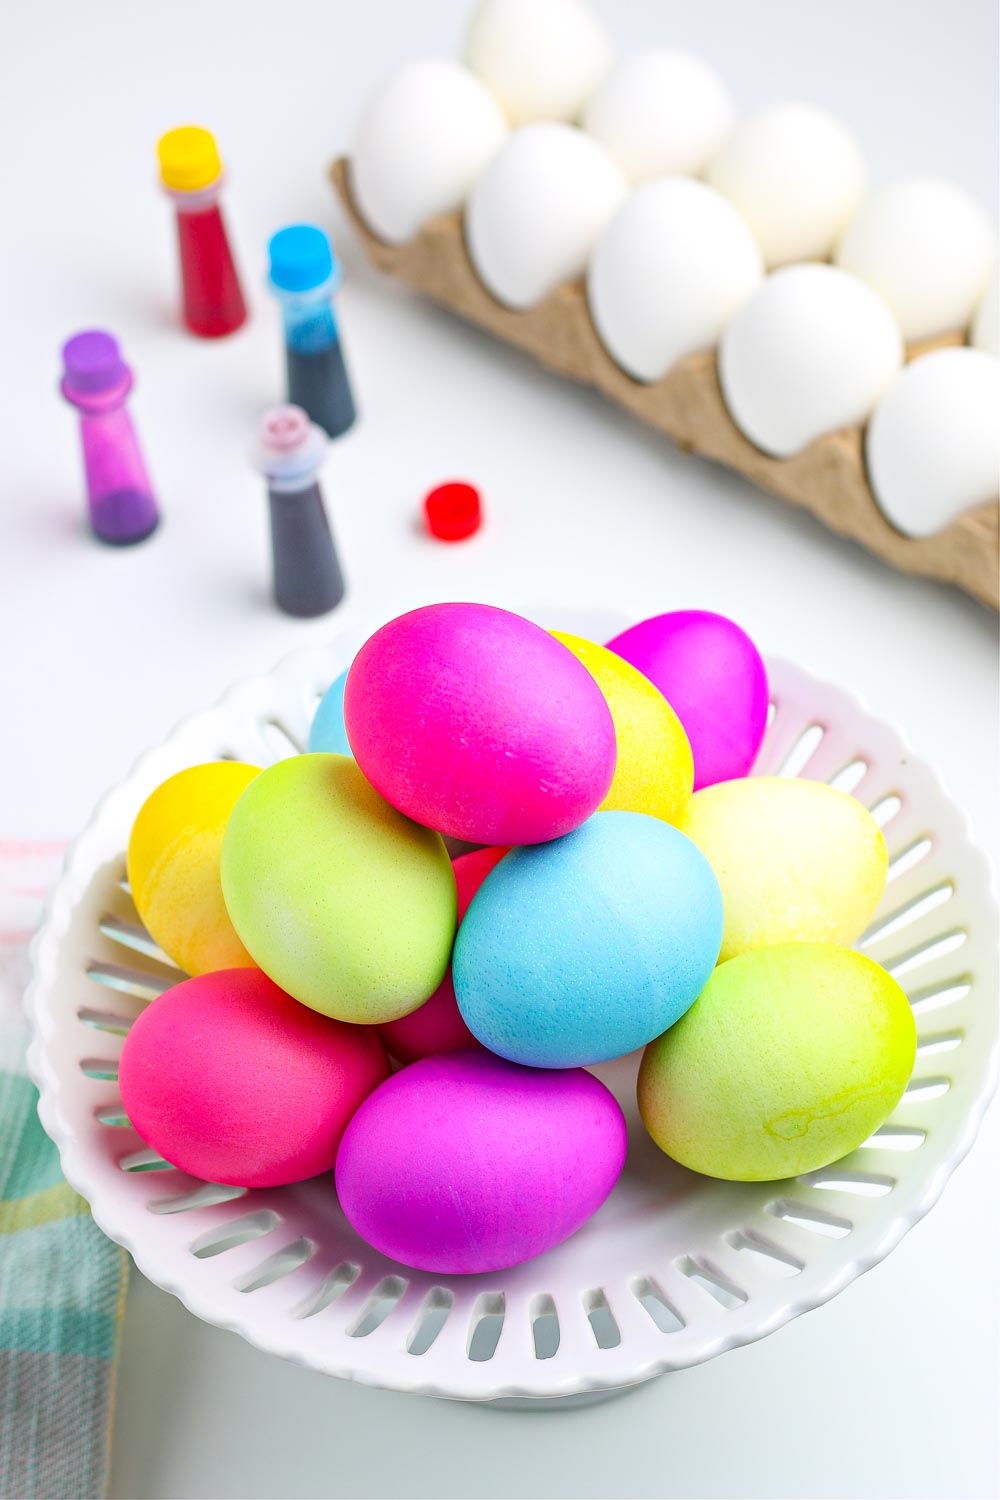 A picture of dyed Easter eggs with good coloring bottles in the background.